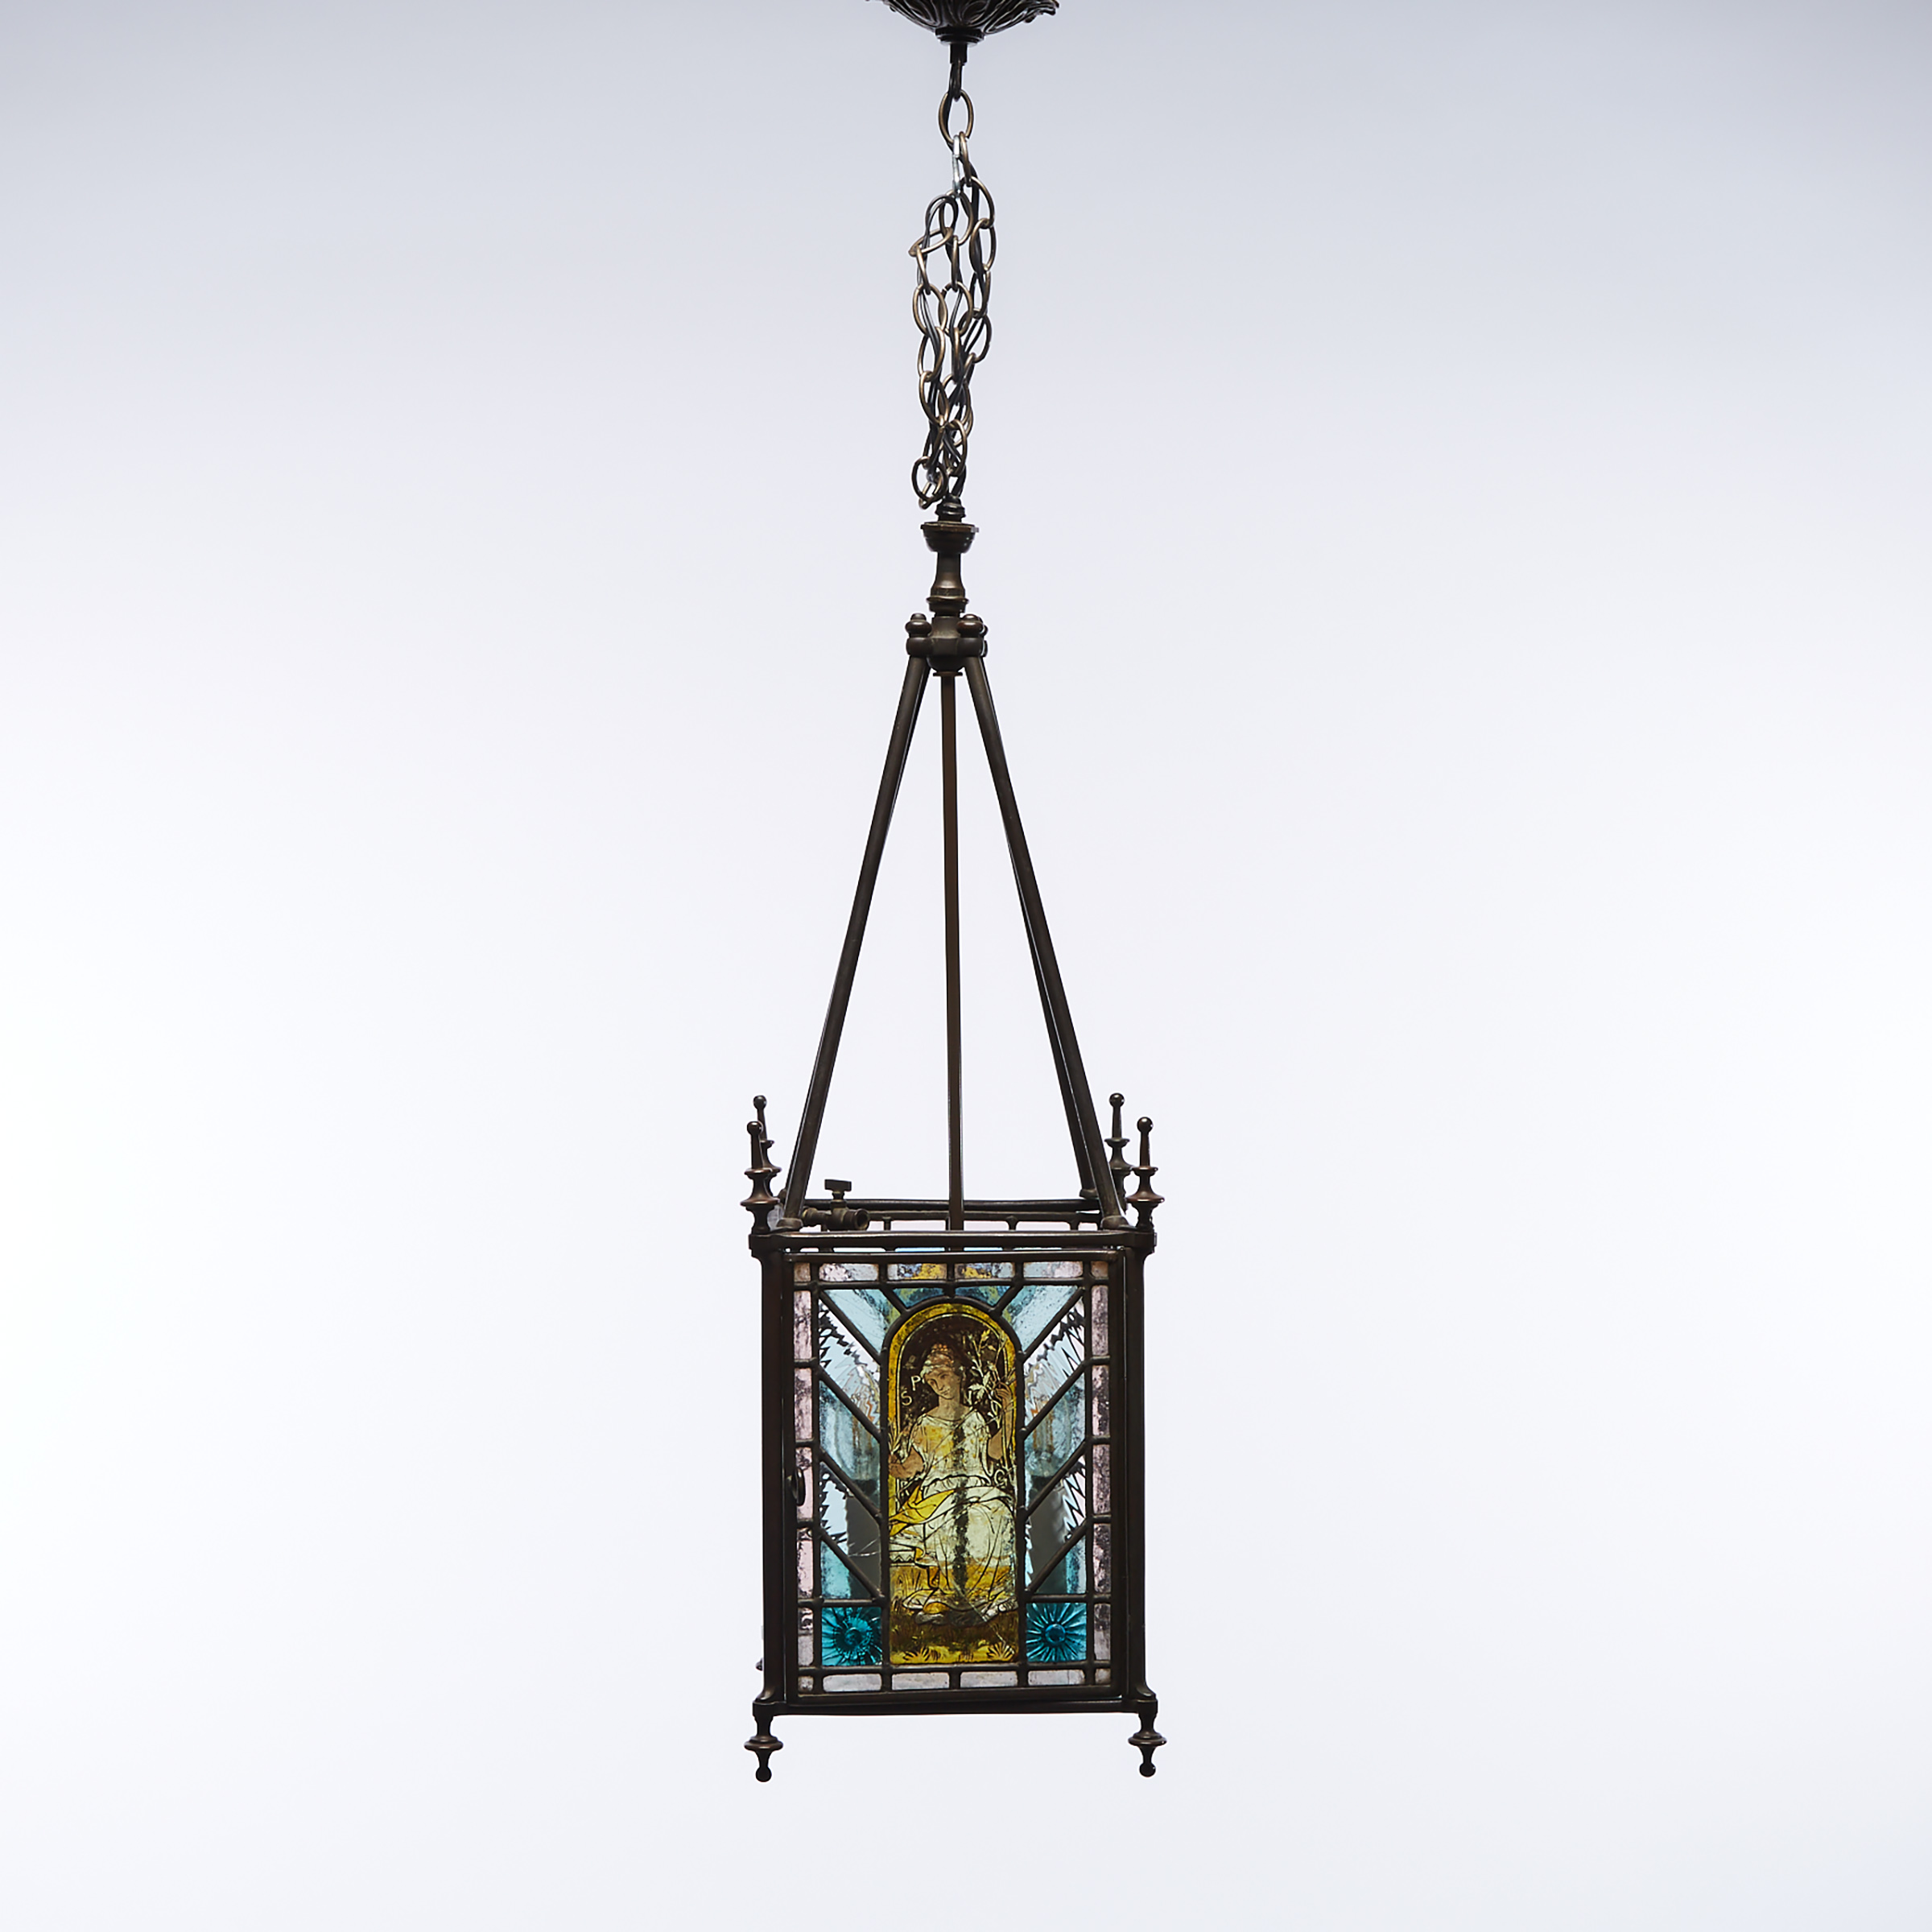 Victorian Renaissance Revival Stained and Leaded Glass Hanging Lantern Hall Fixture, 19th century